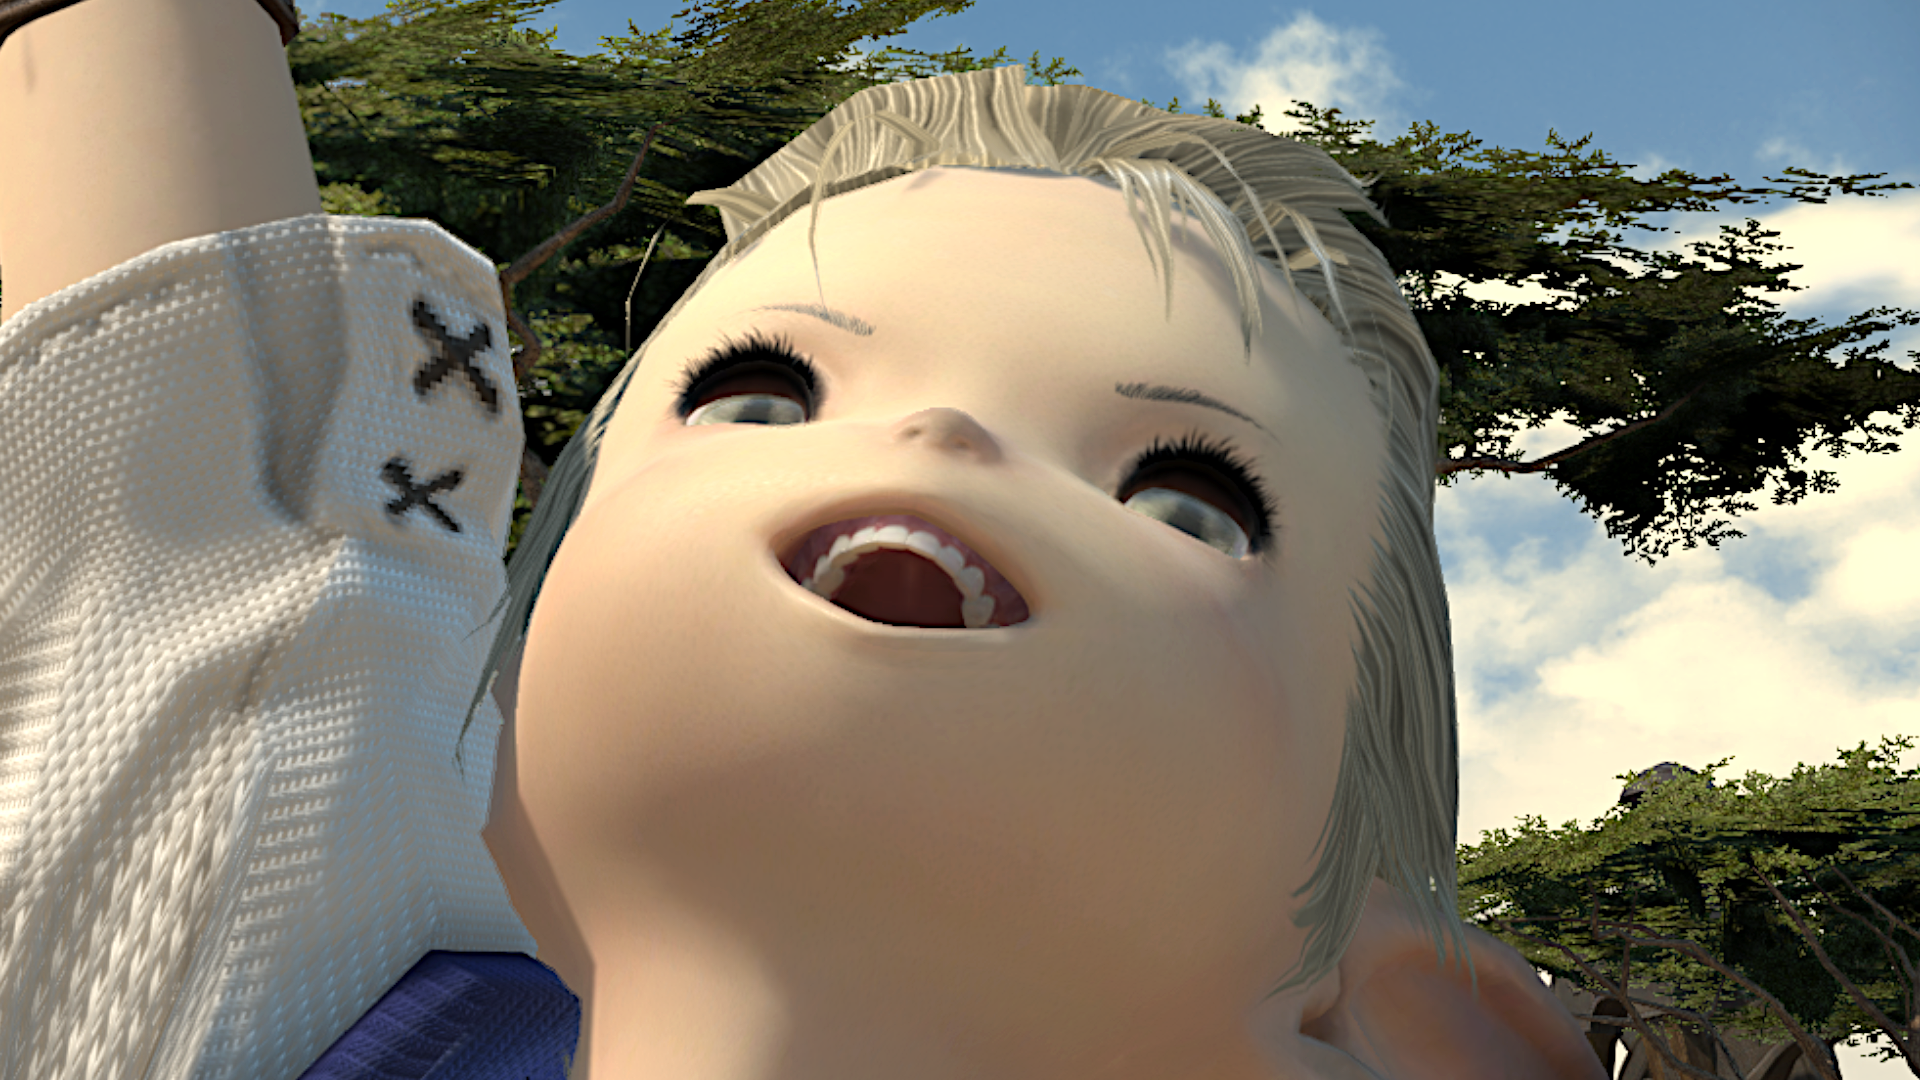 Final Fantasy 14: Dawntrail’s new benchmark will get a 2.0 version after player upset over lifeless eyes, flattened faces, and cursed lalafell dolphin teeth